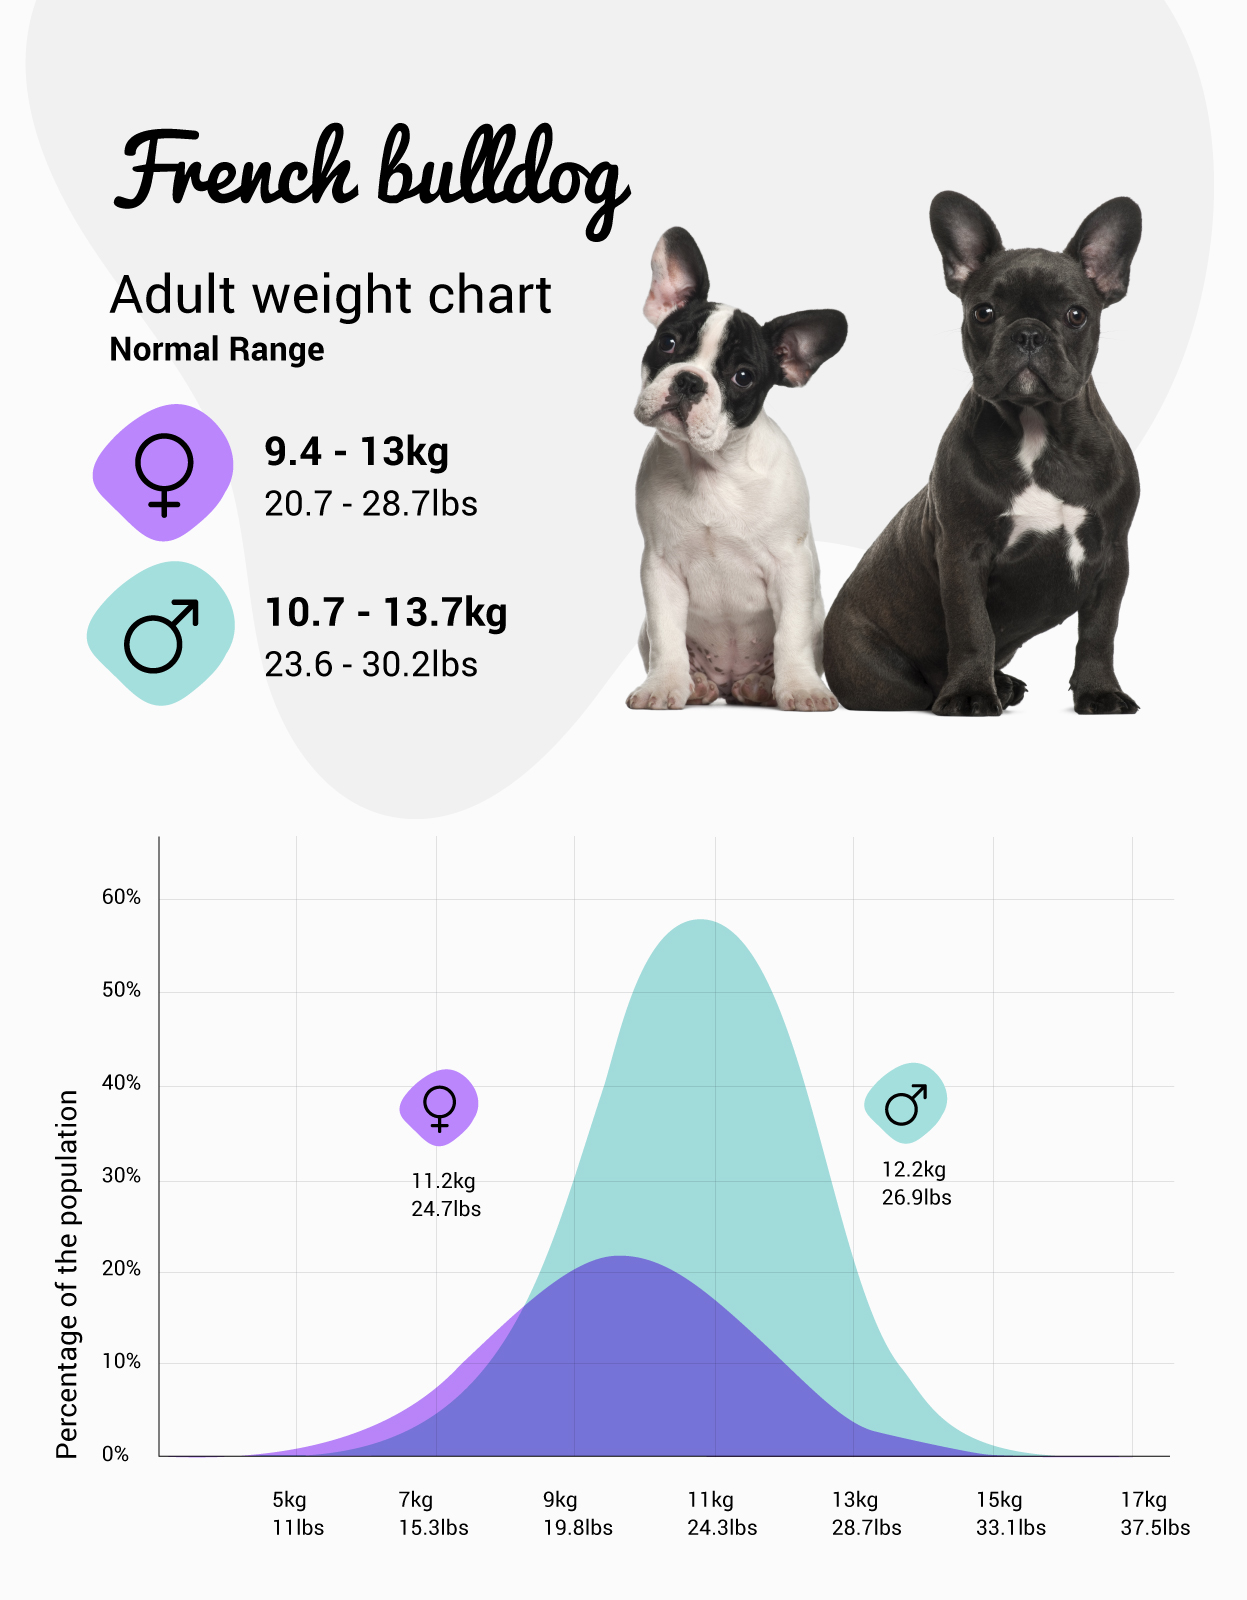 how many kg is a french bulldog? 2